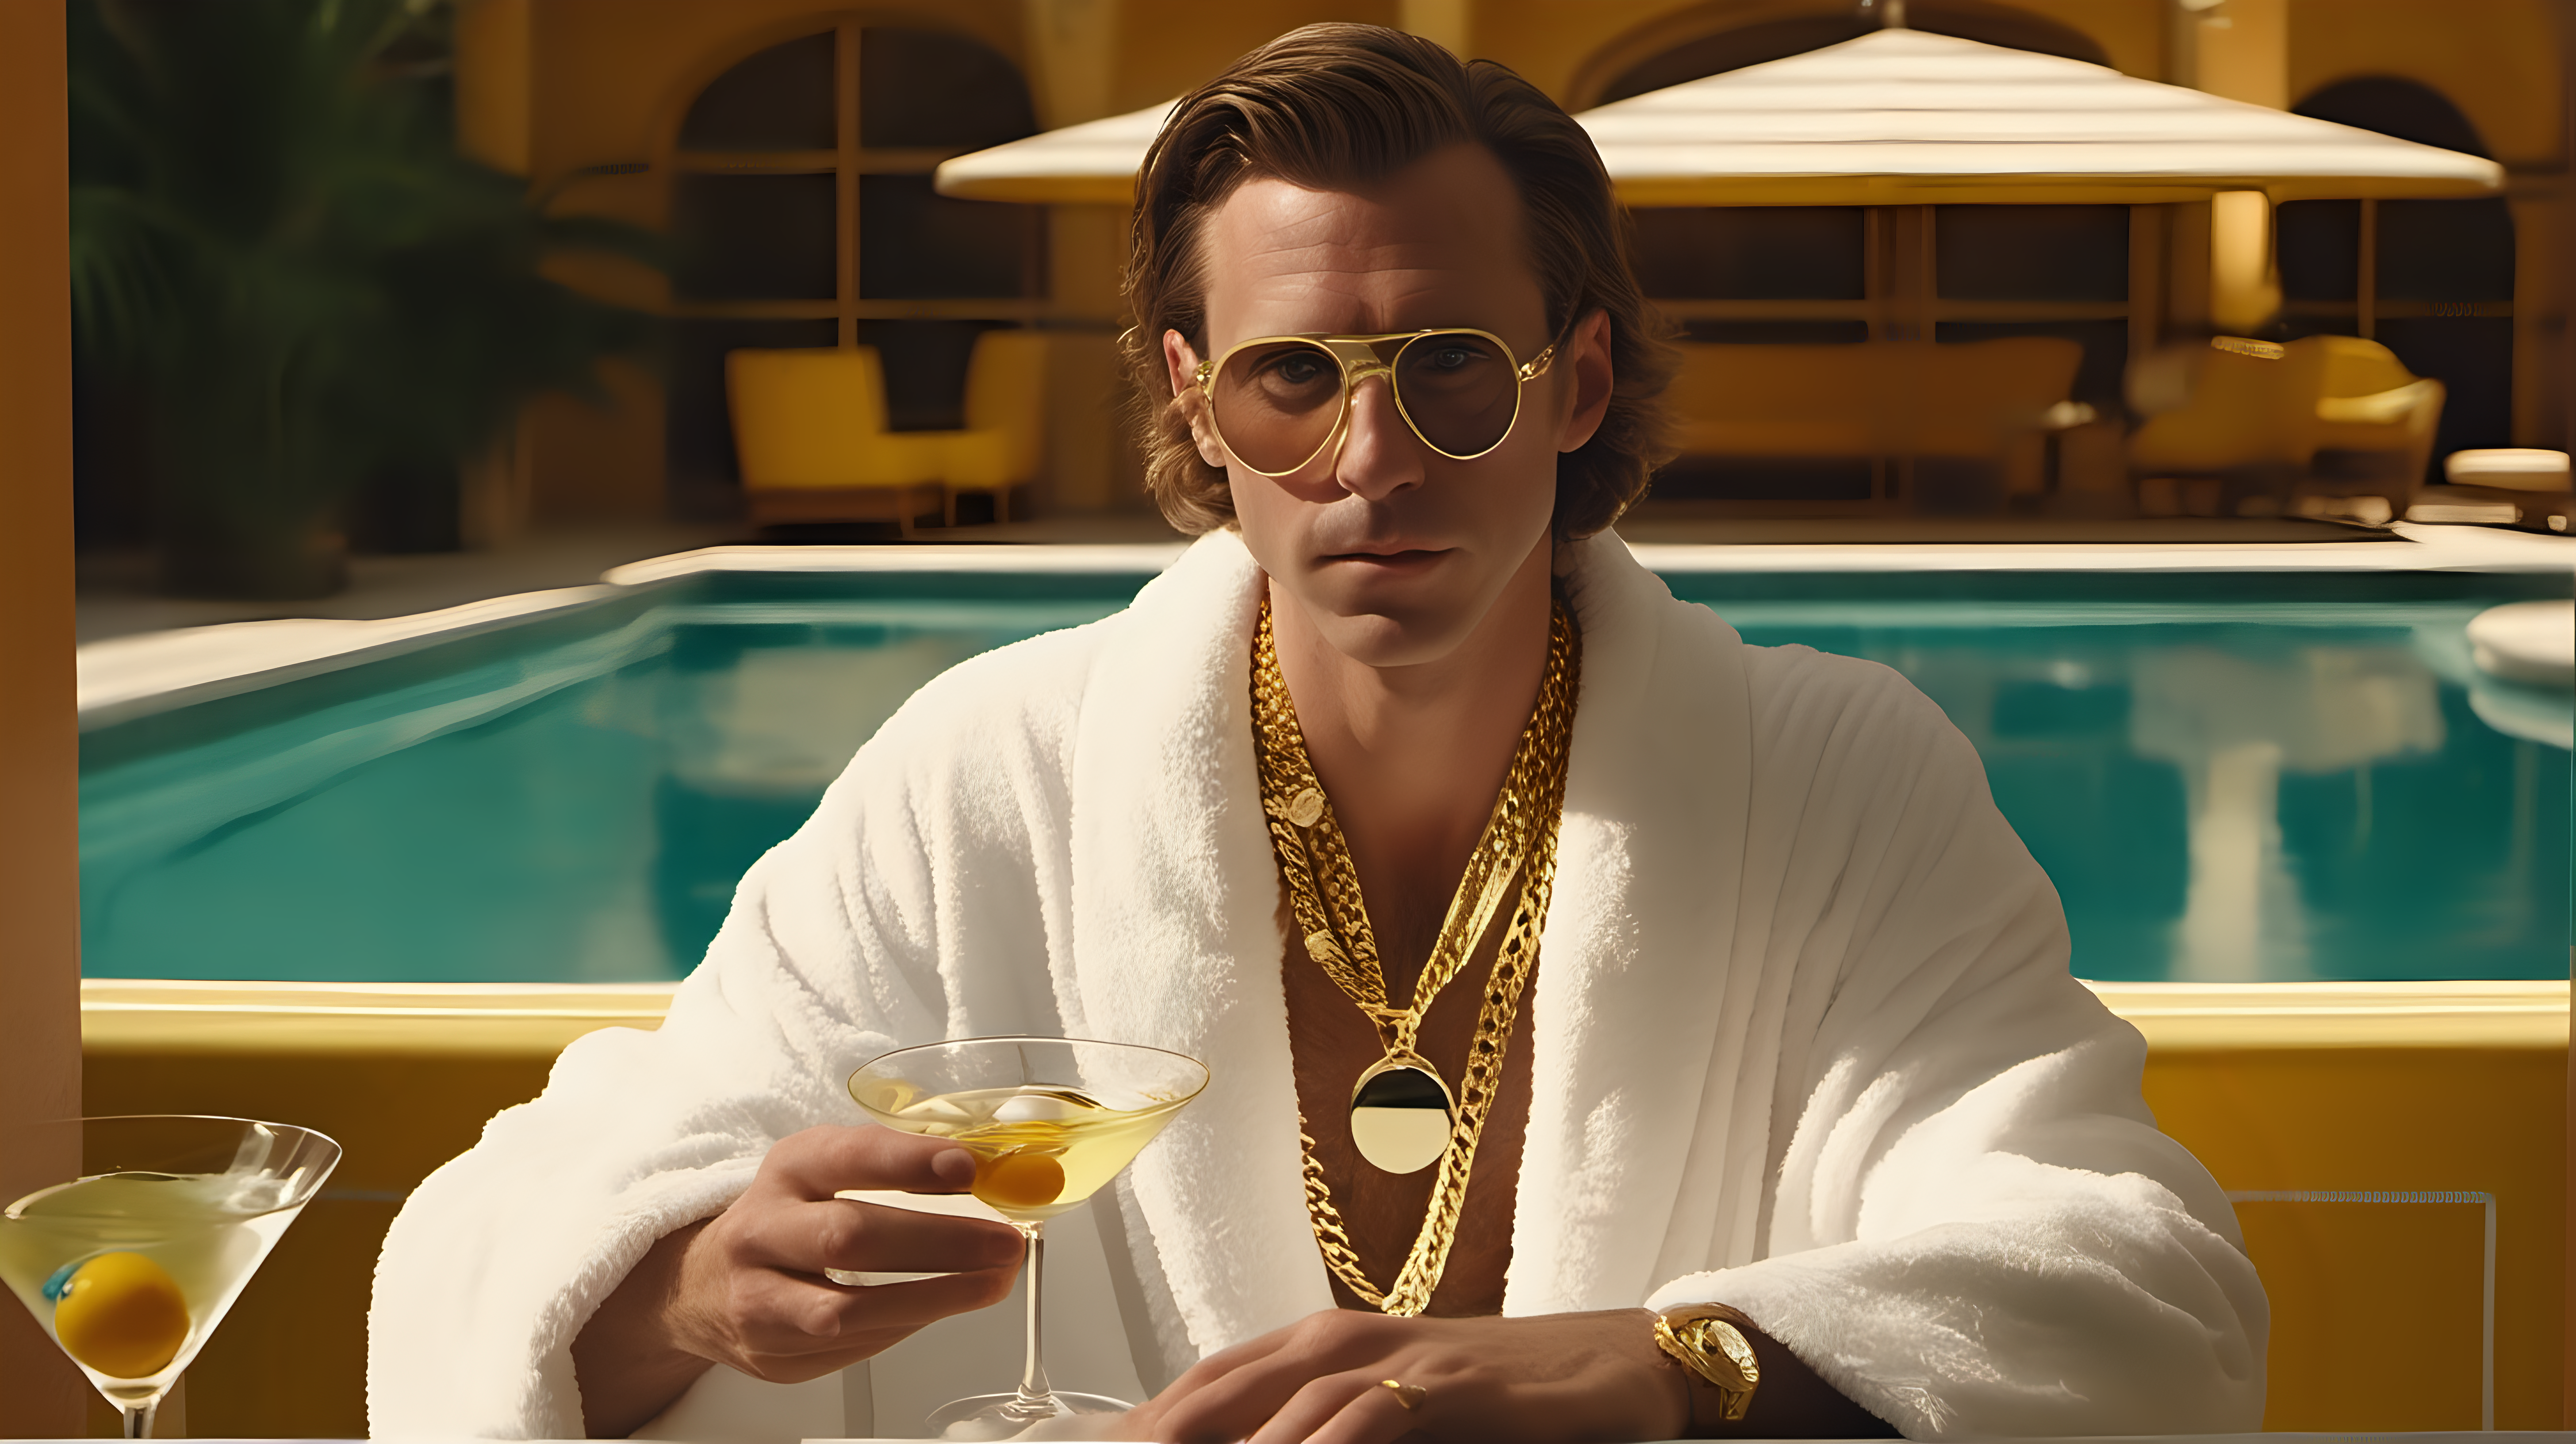 cinematic photoreal image of a man looking at camera in a bathrobe wearing a gold necklace sitting poolside with a martini in his hand in the style of a wes anderson film